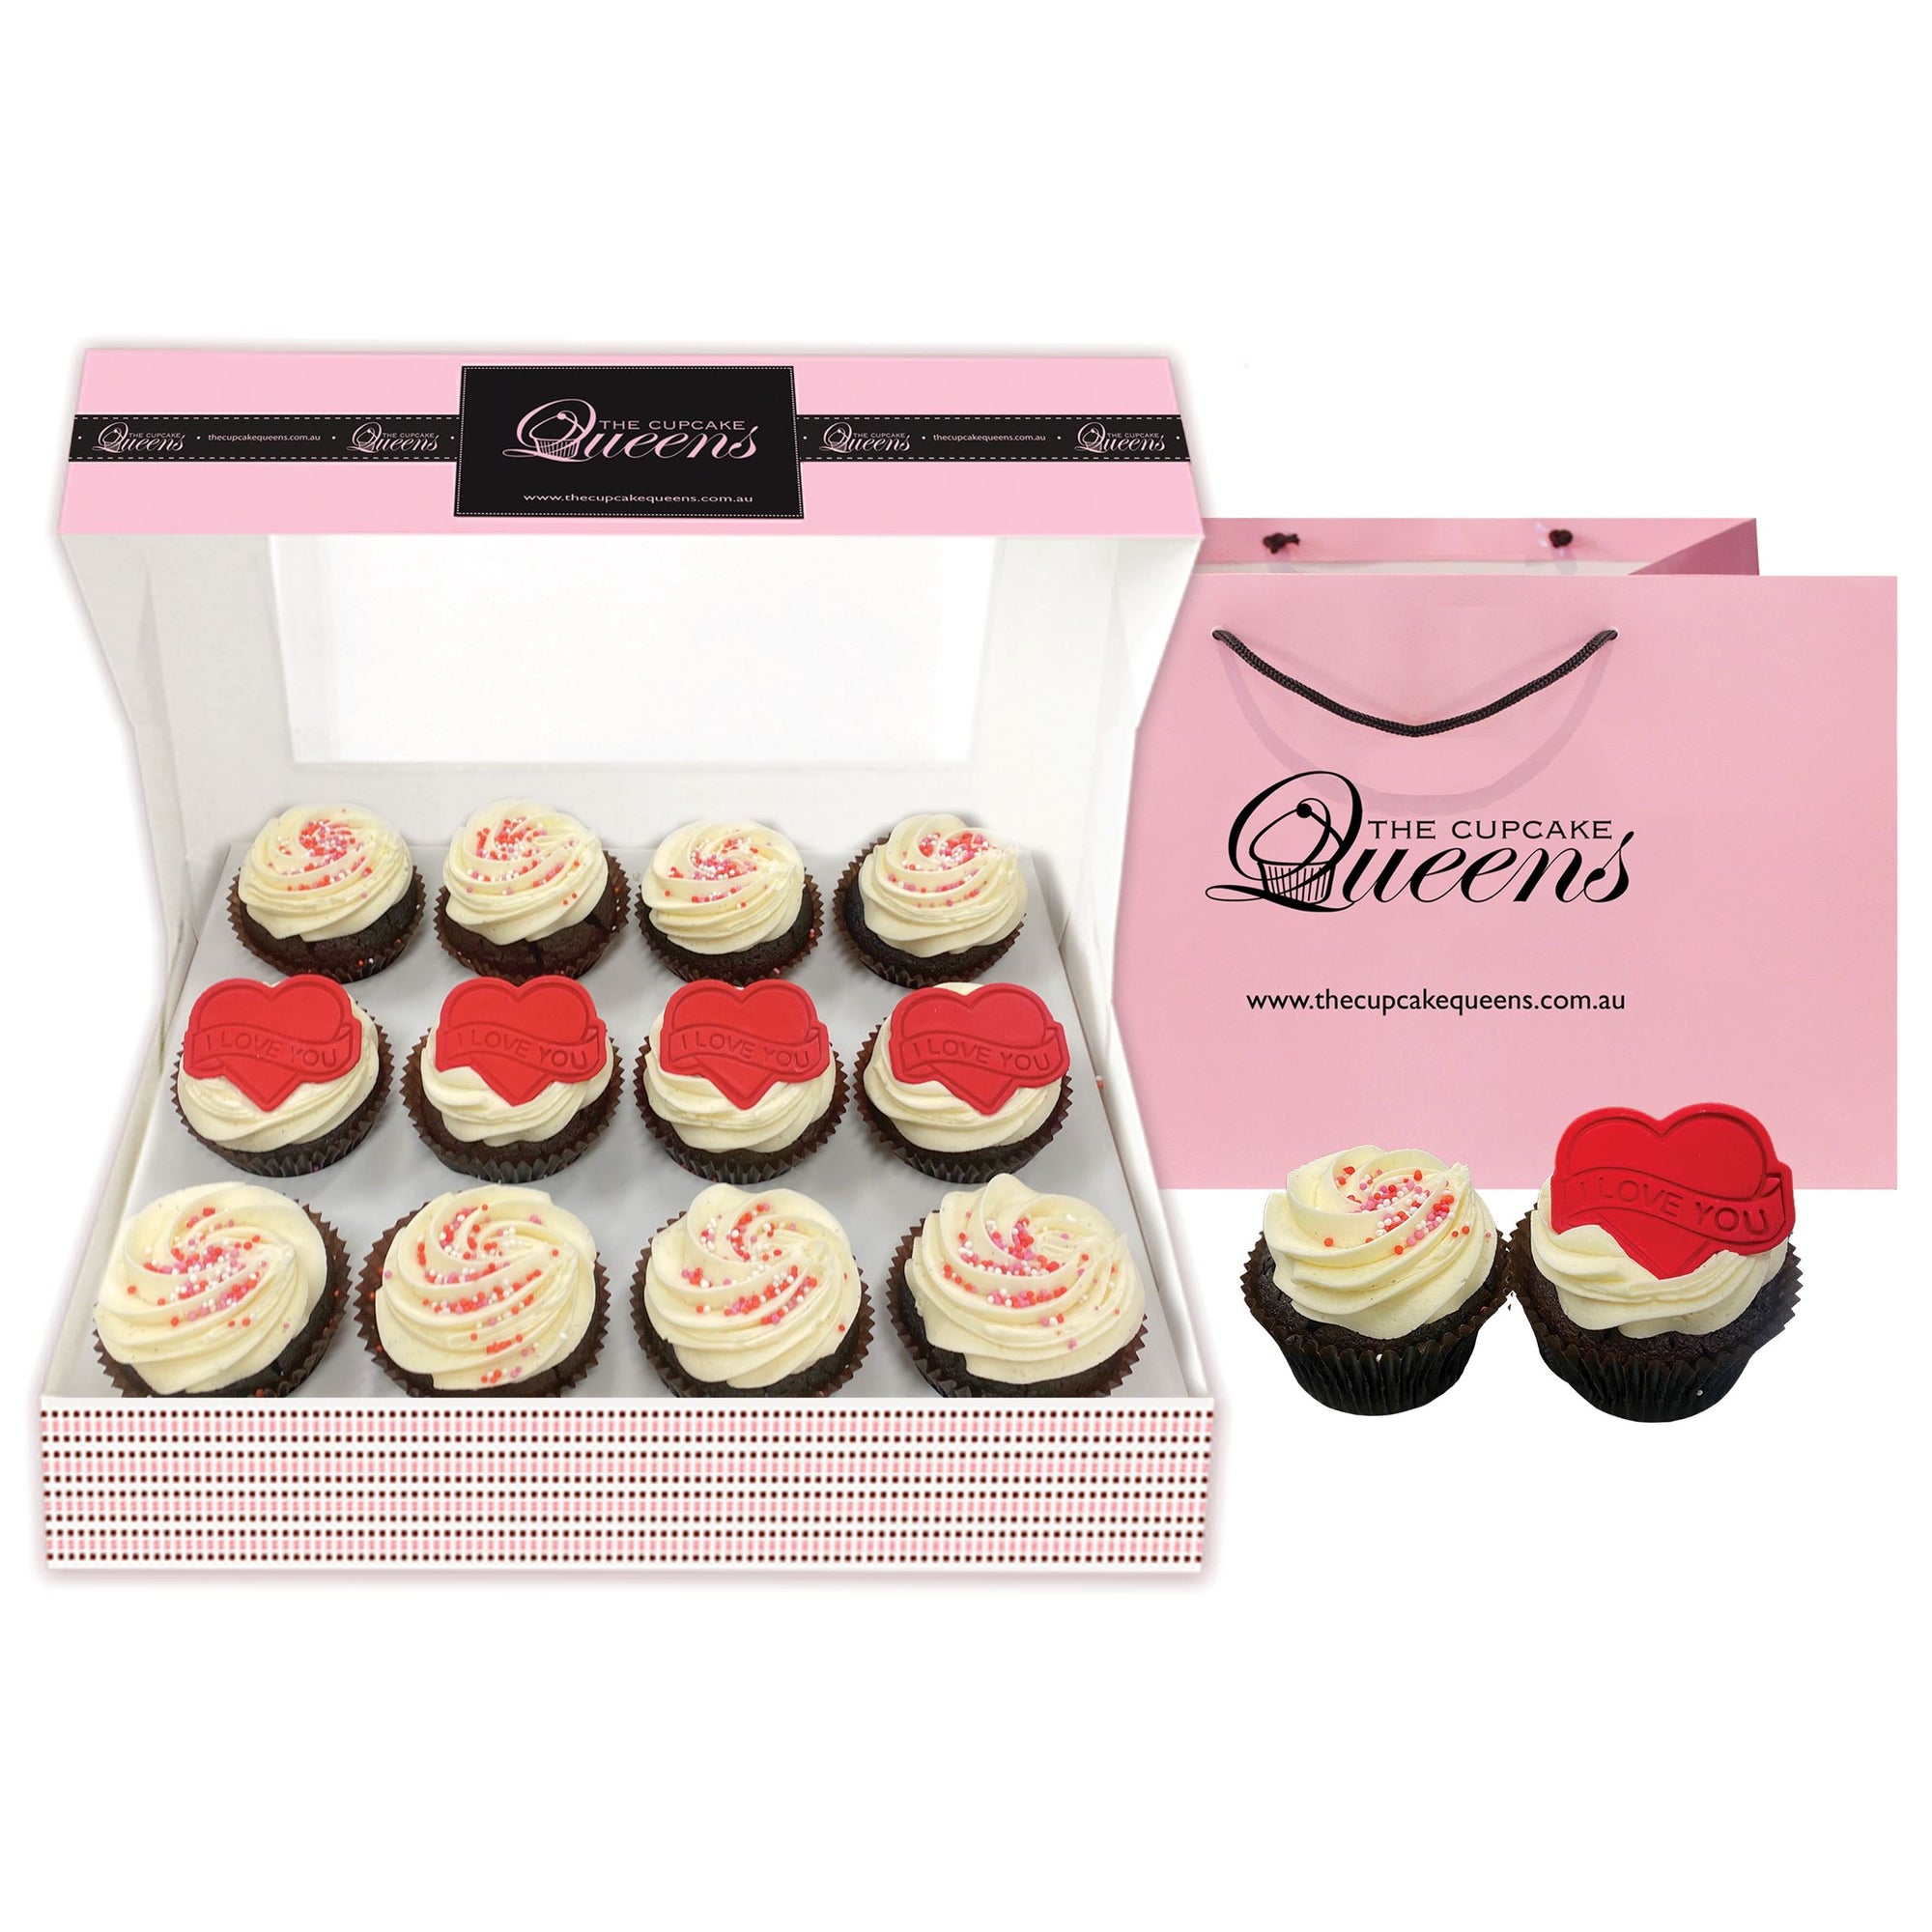 Gluten Friendly Valentine's Day Box Cupcakes Pre Selected Boxes The Cupcake Queens 